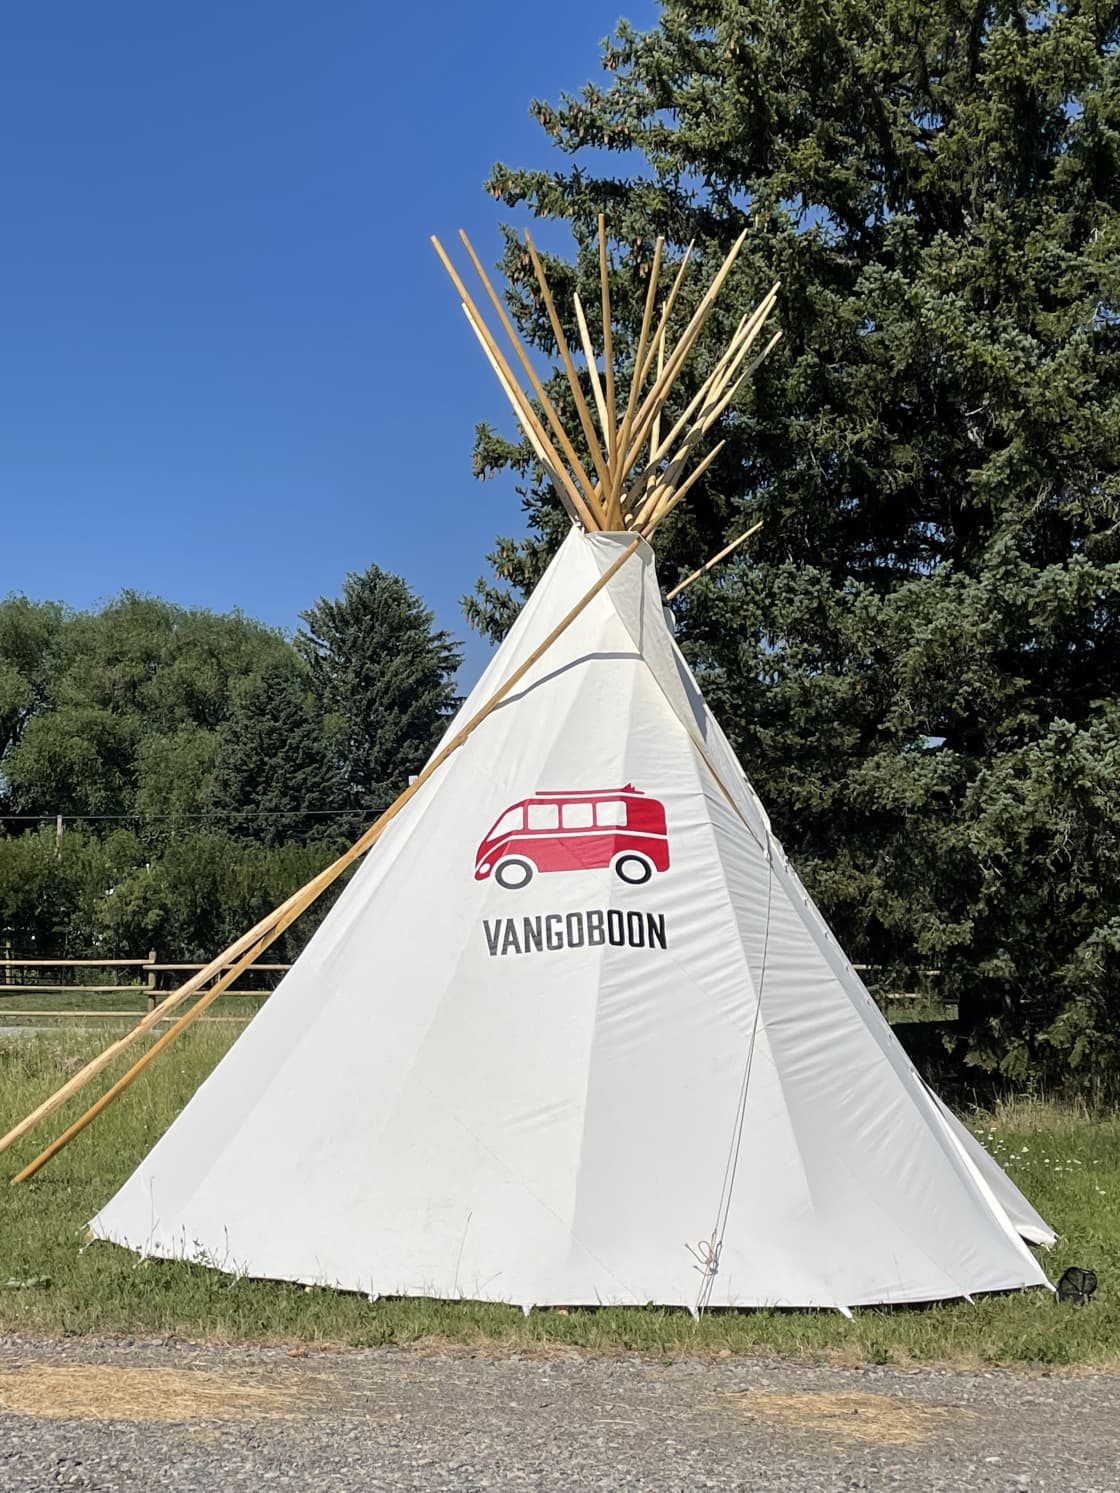 Look for our TeePee!